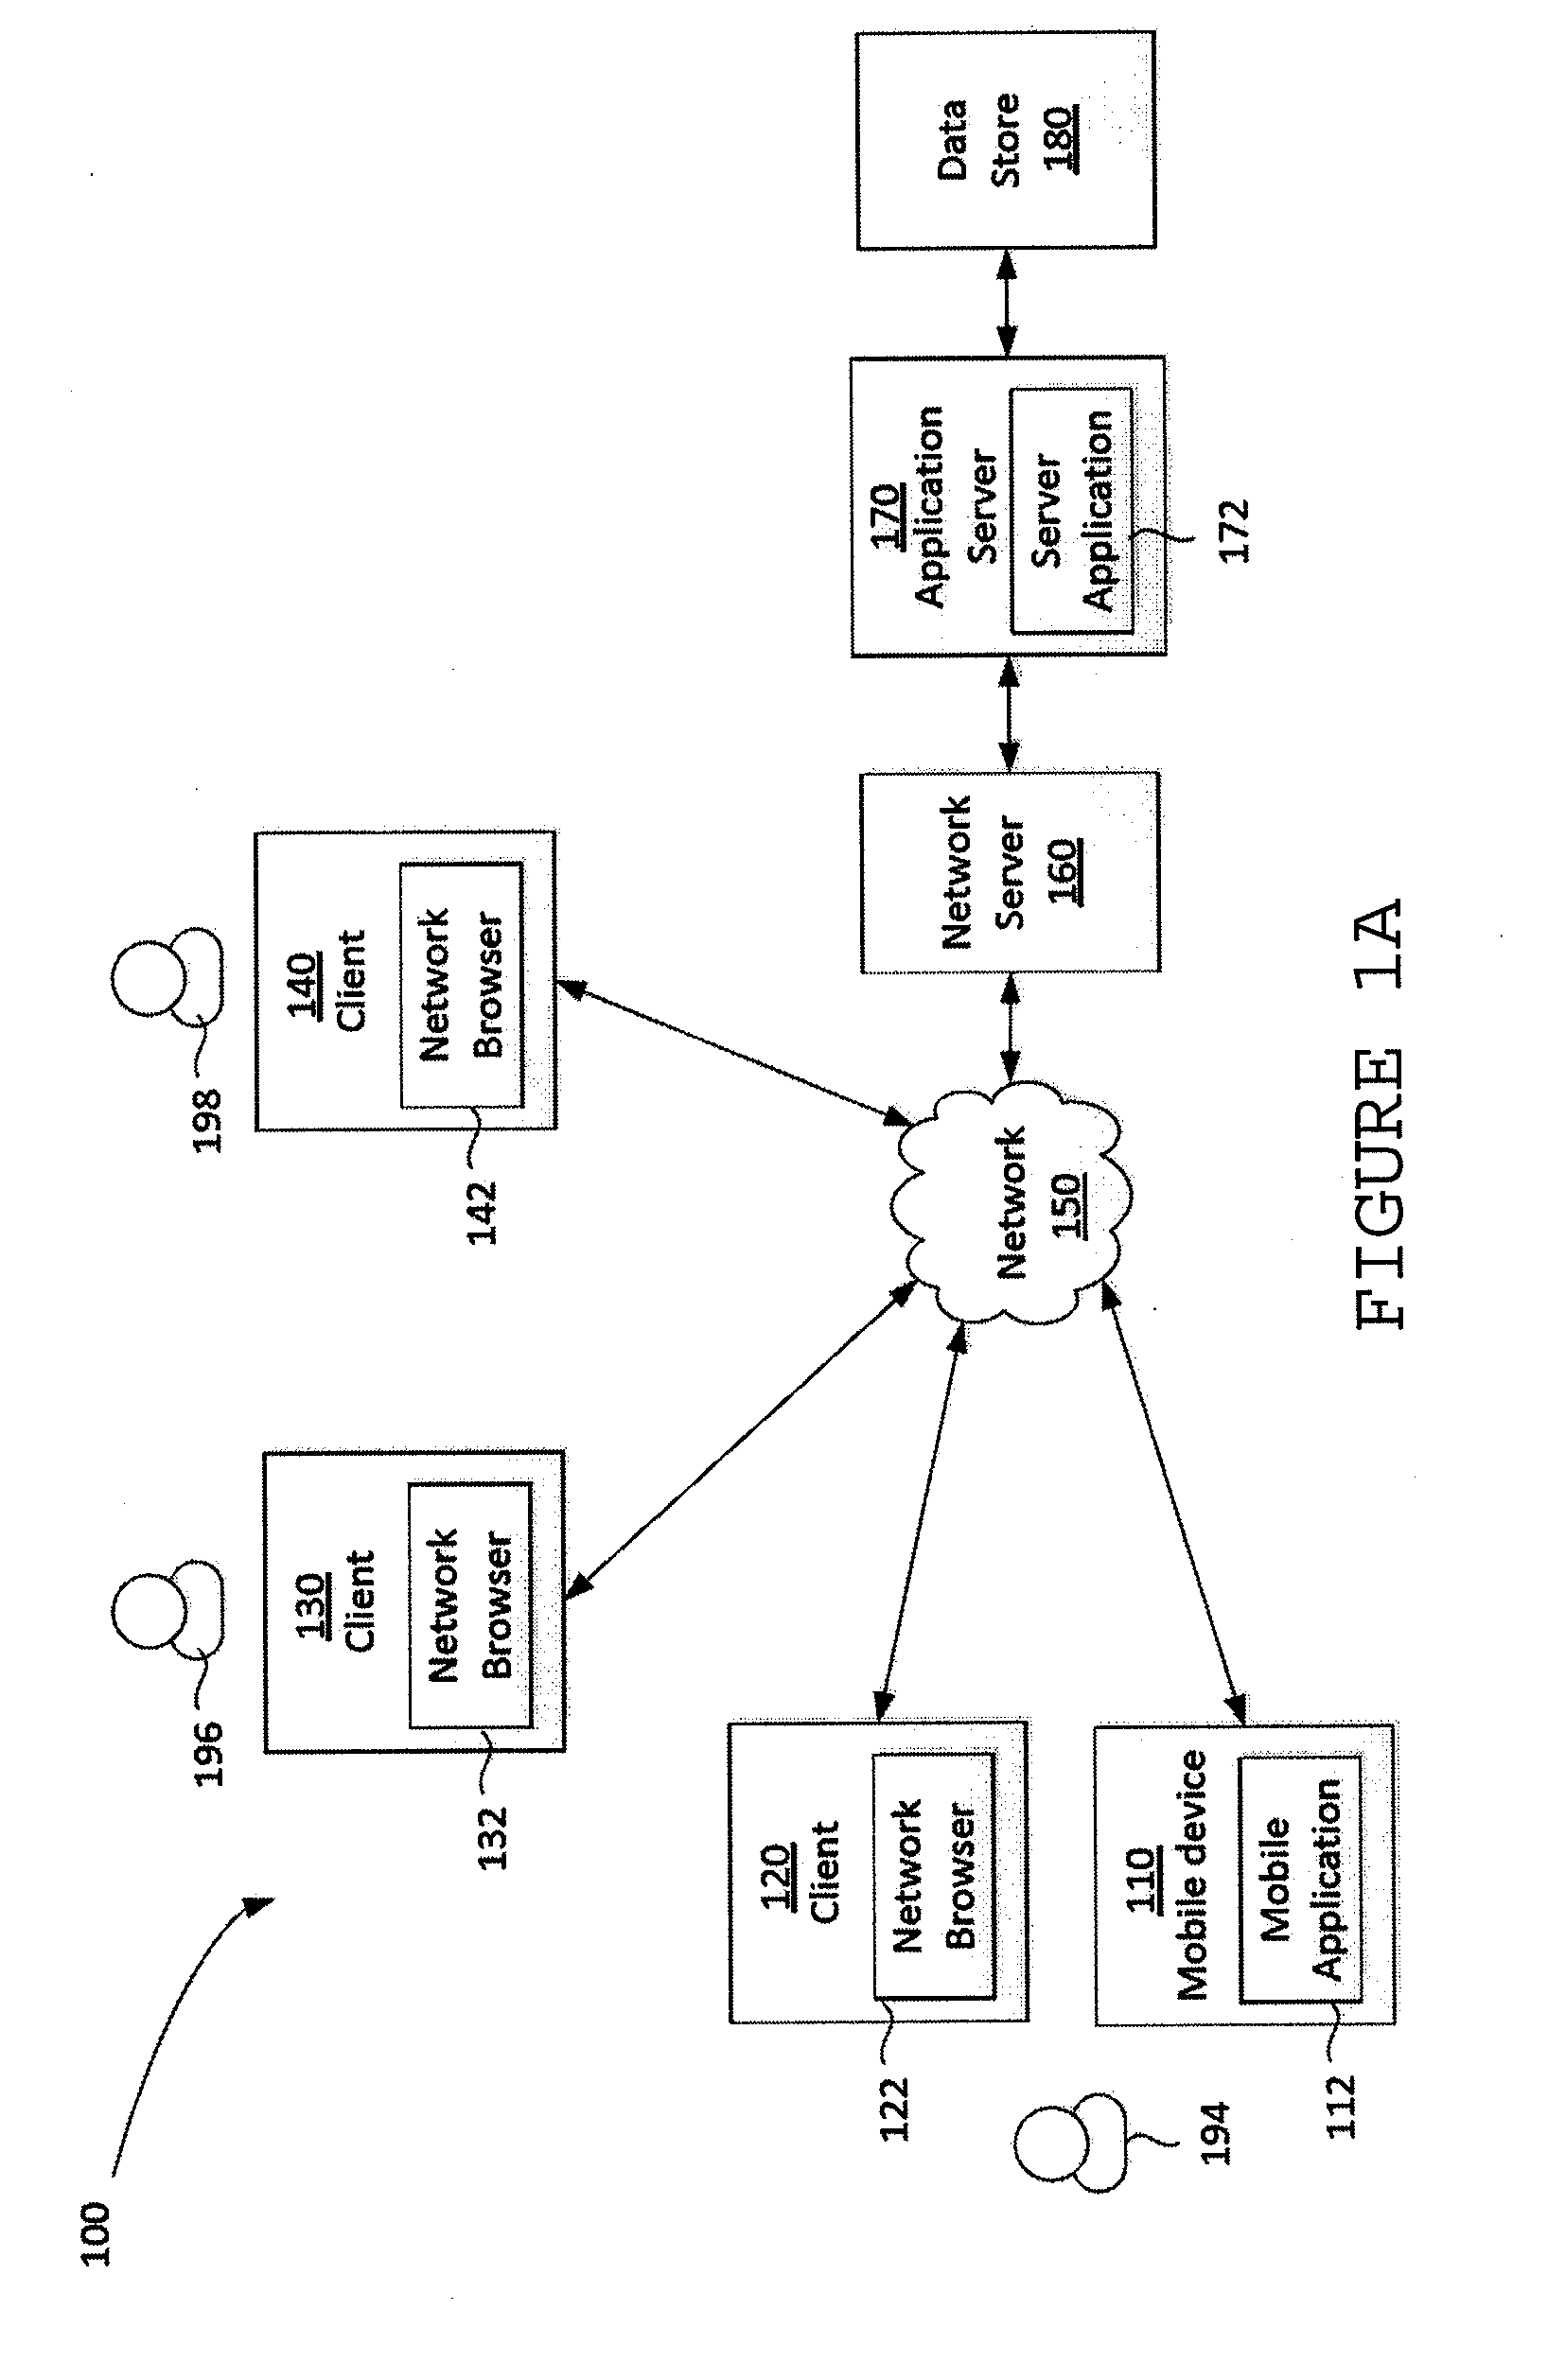 System and method for providing analysis of visual function using a mobile device with display